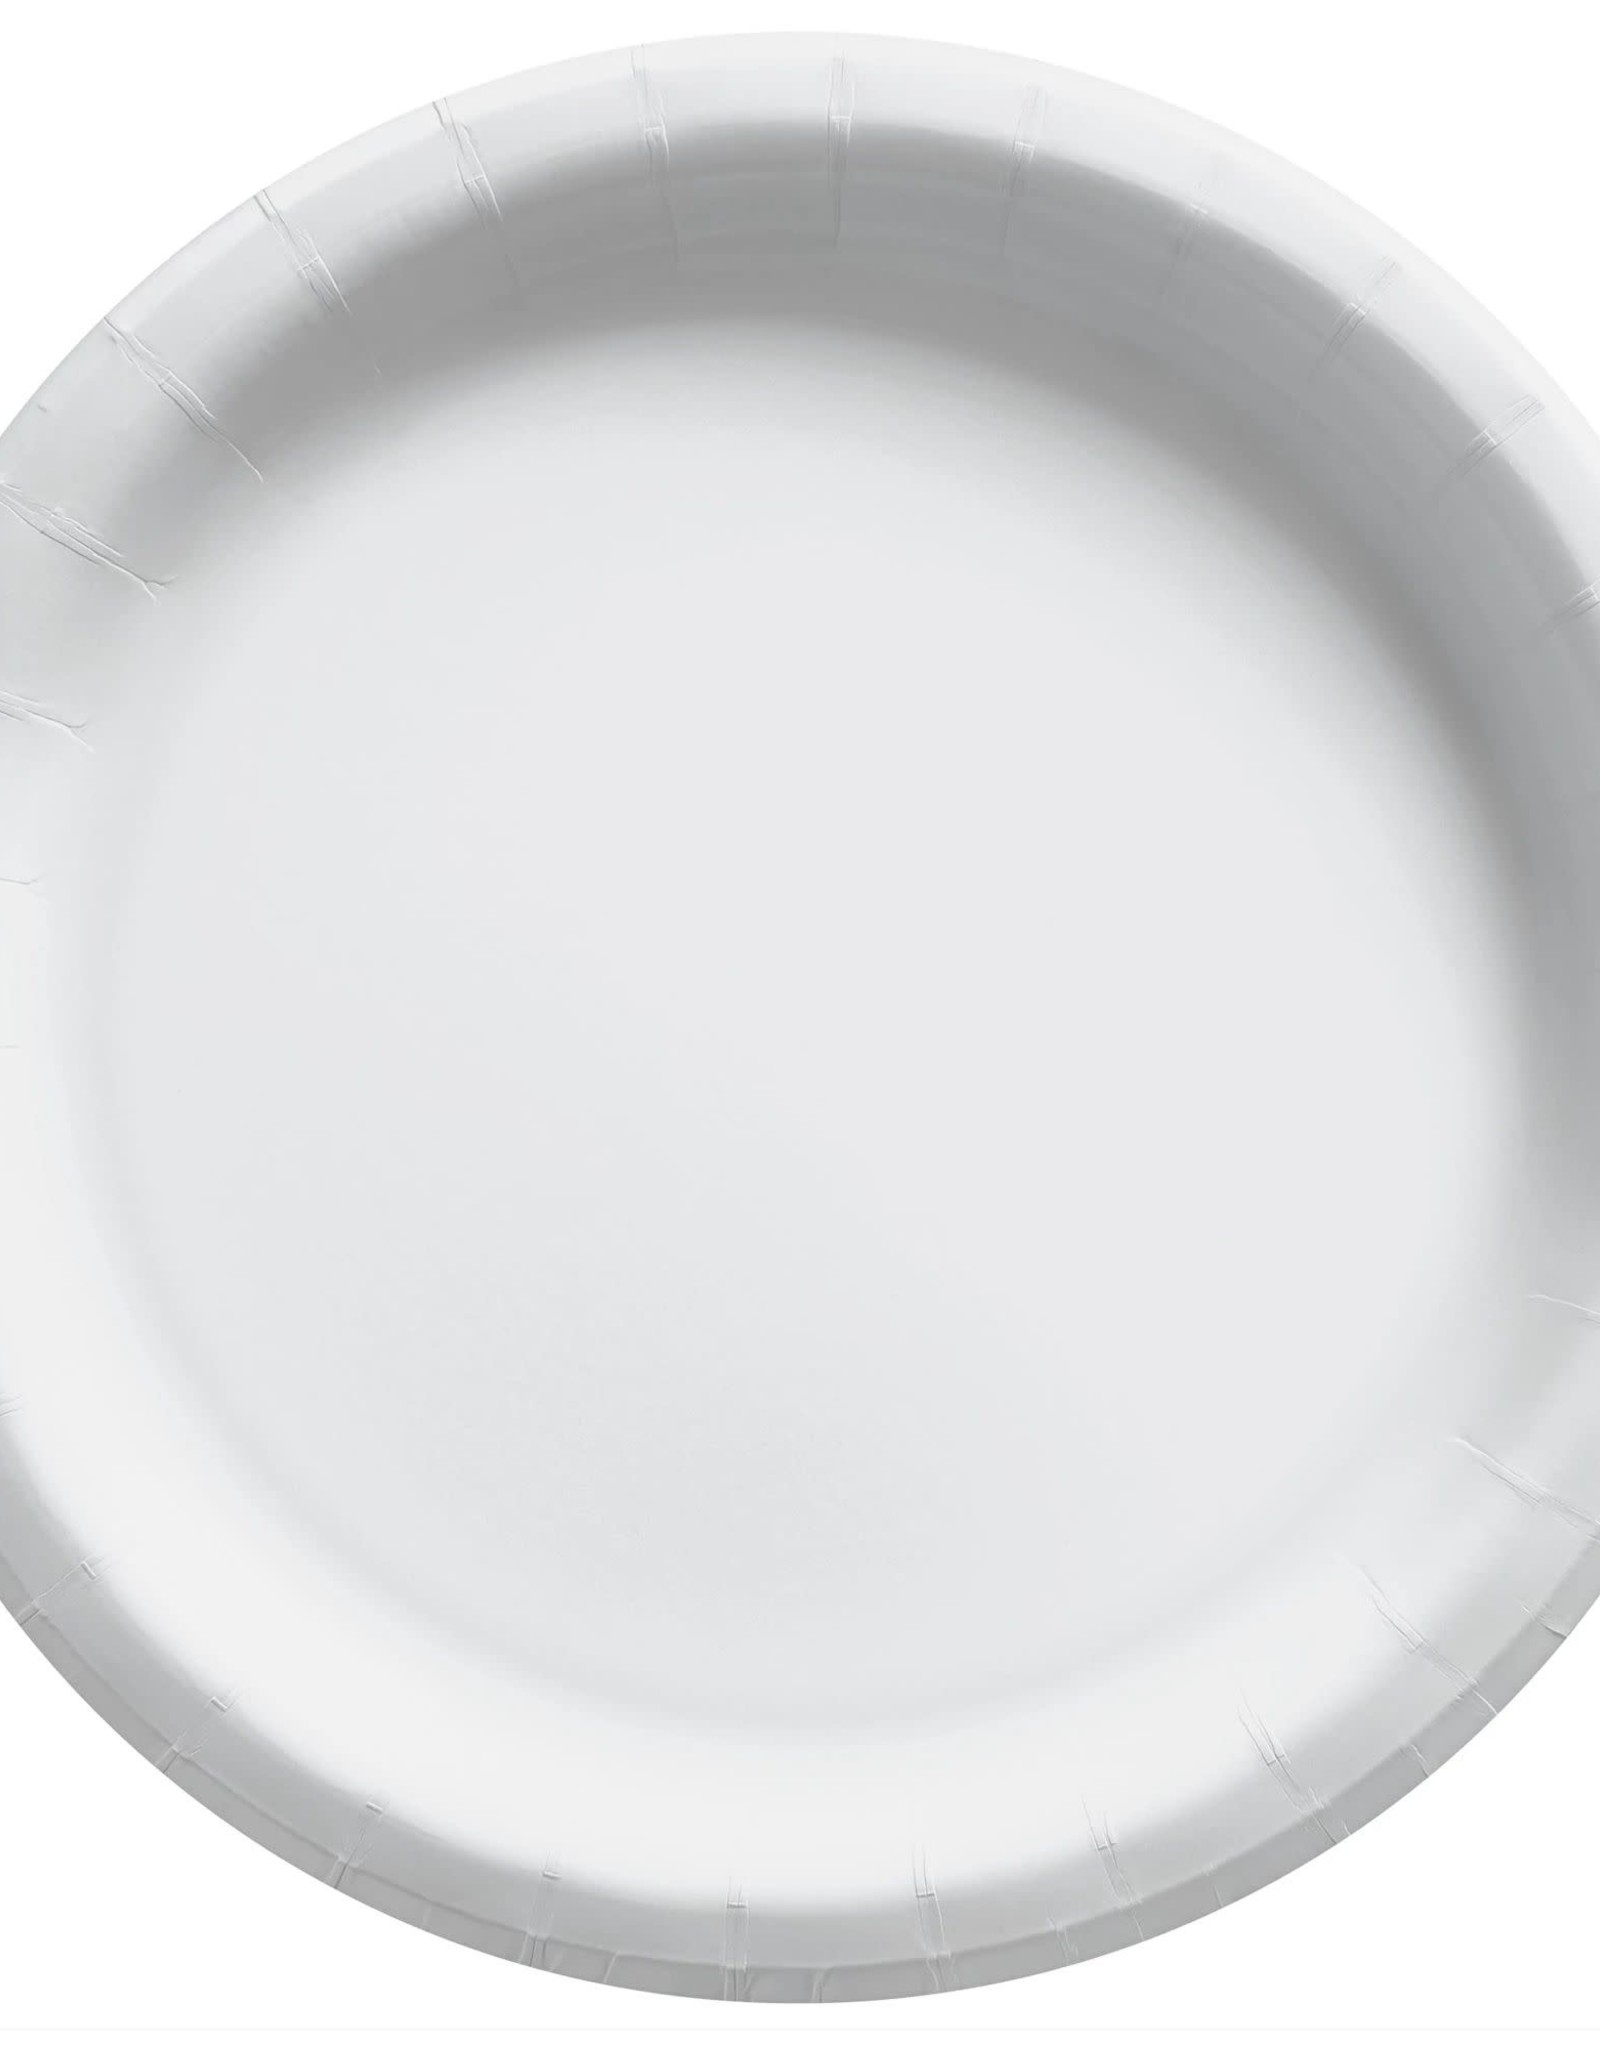 Frosty White Lunch Plates 20pcs